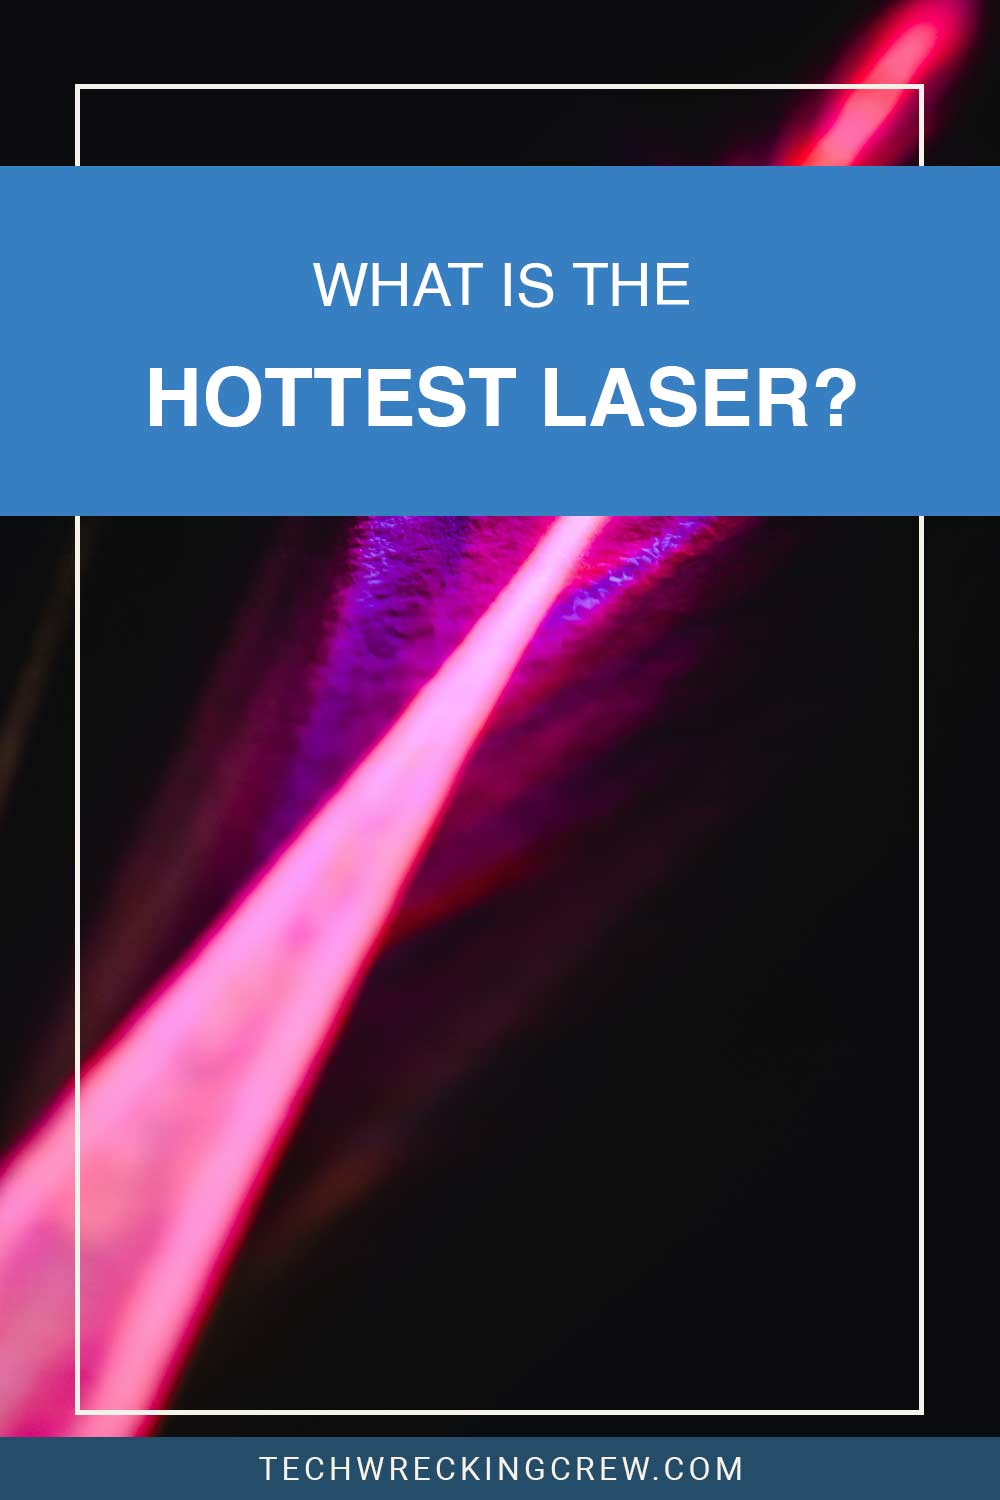 What Is The Hottest Laser?